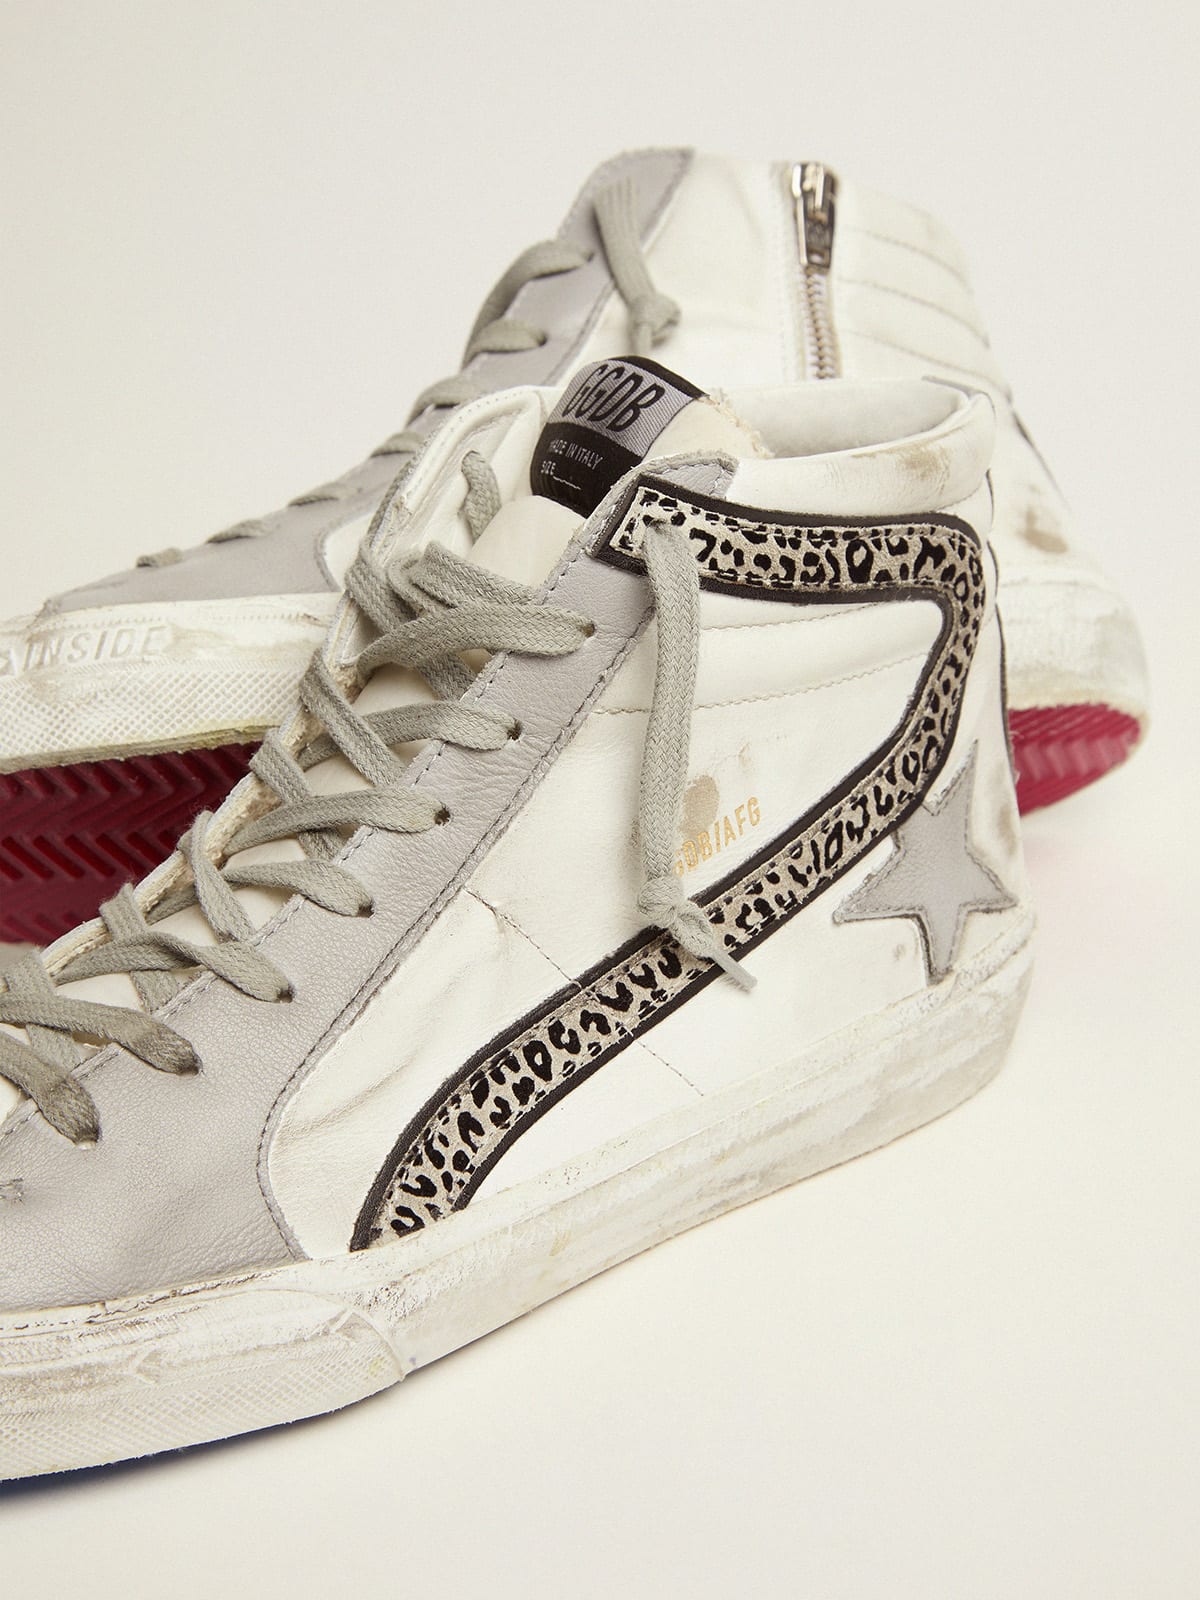 Golden Goose - Slide sneakers with white leather upper and animal-print suede flash in 